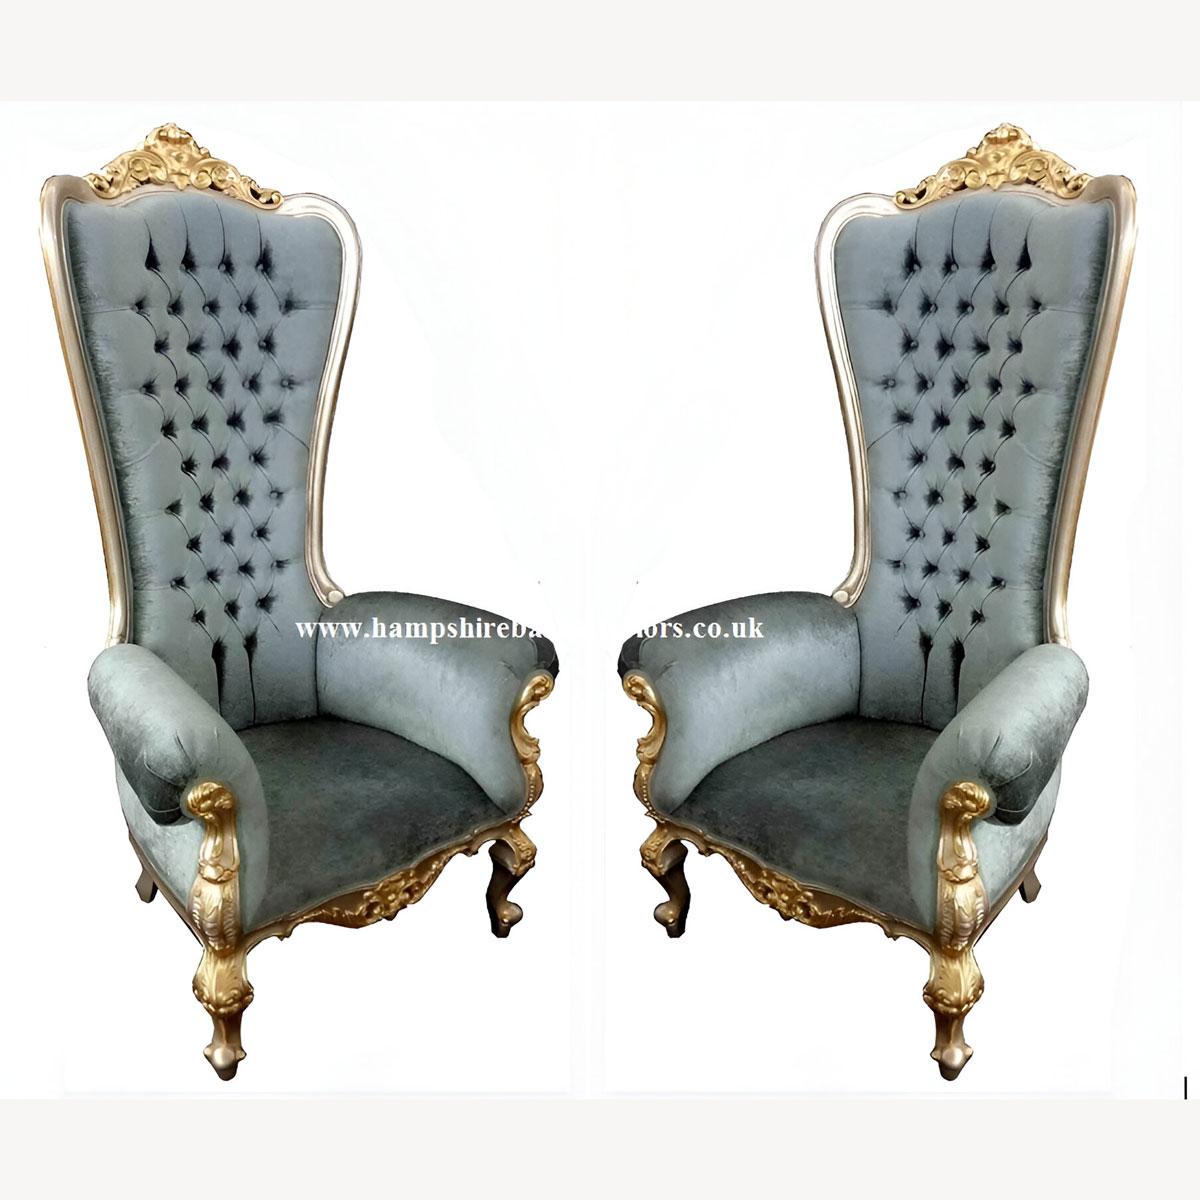 Elegance Huge Throne Chair In Your Choice Frame Colour And Fabric Colour 1 - Hampshire Barn Interiors - Elegance Huge Throne Chair In Your Choice Frame Colour And Fabric Colour -